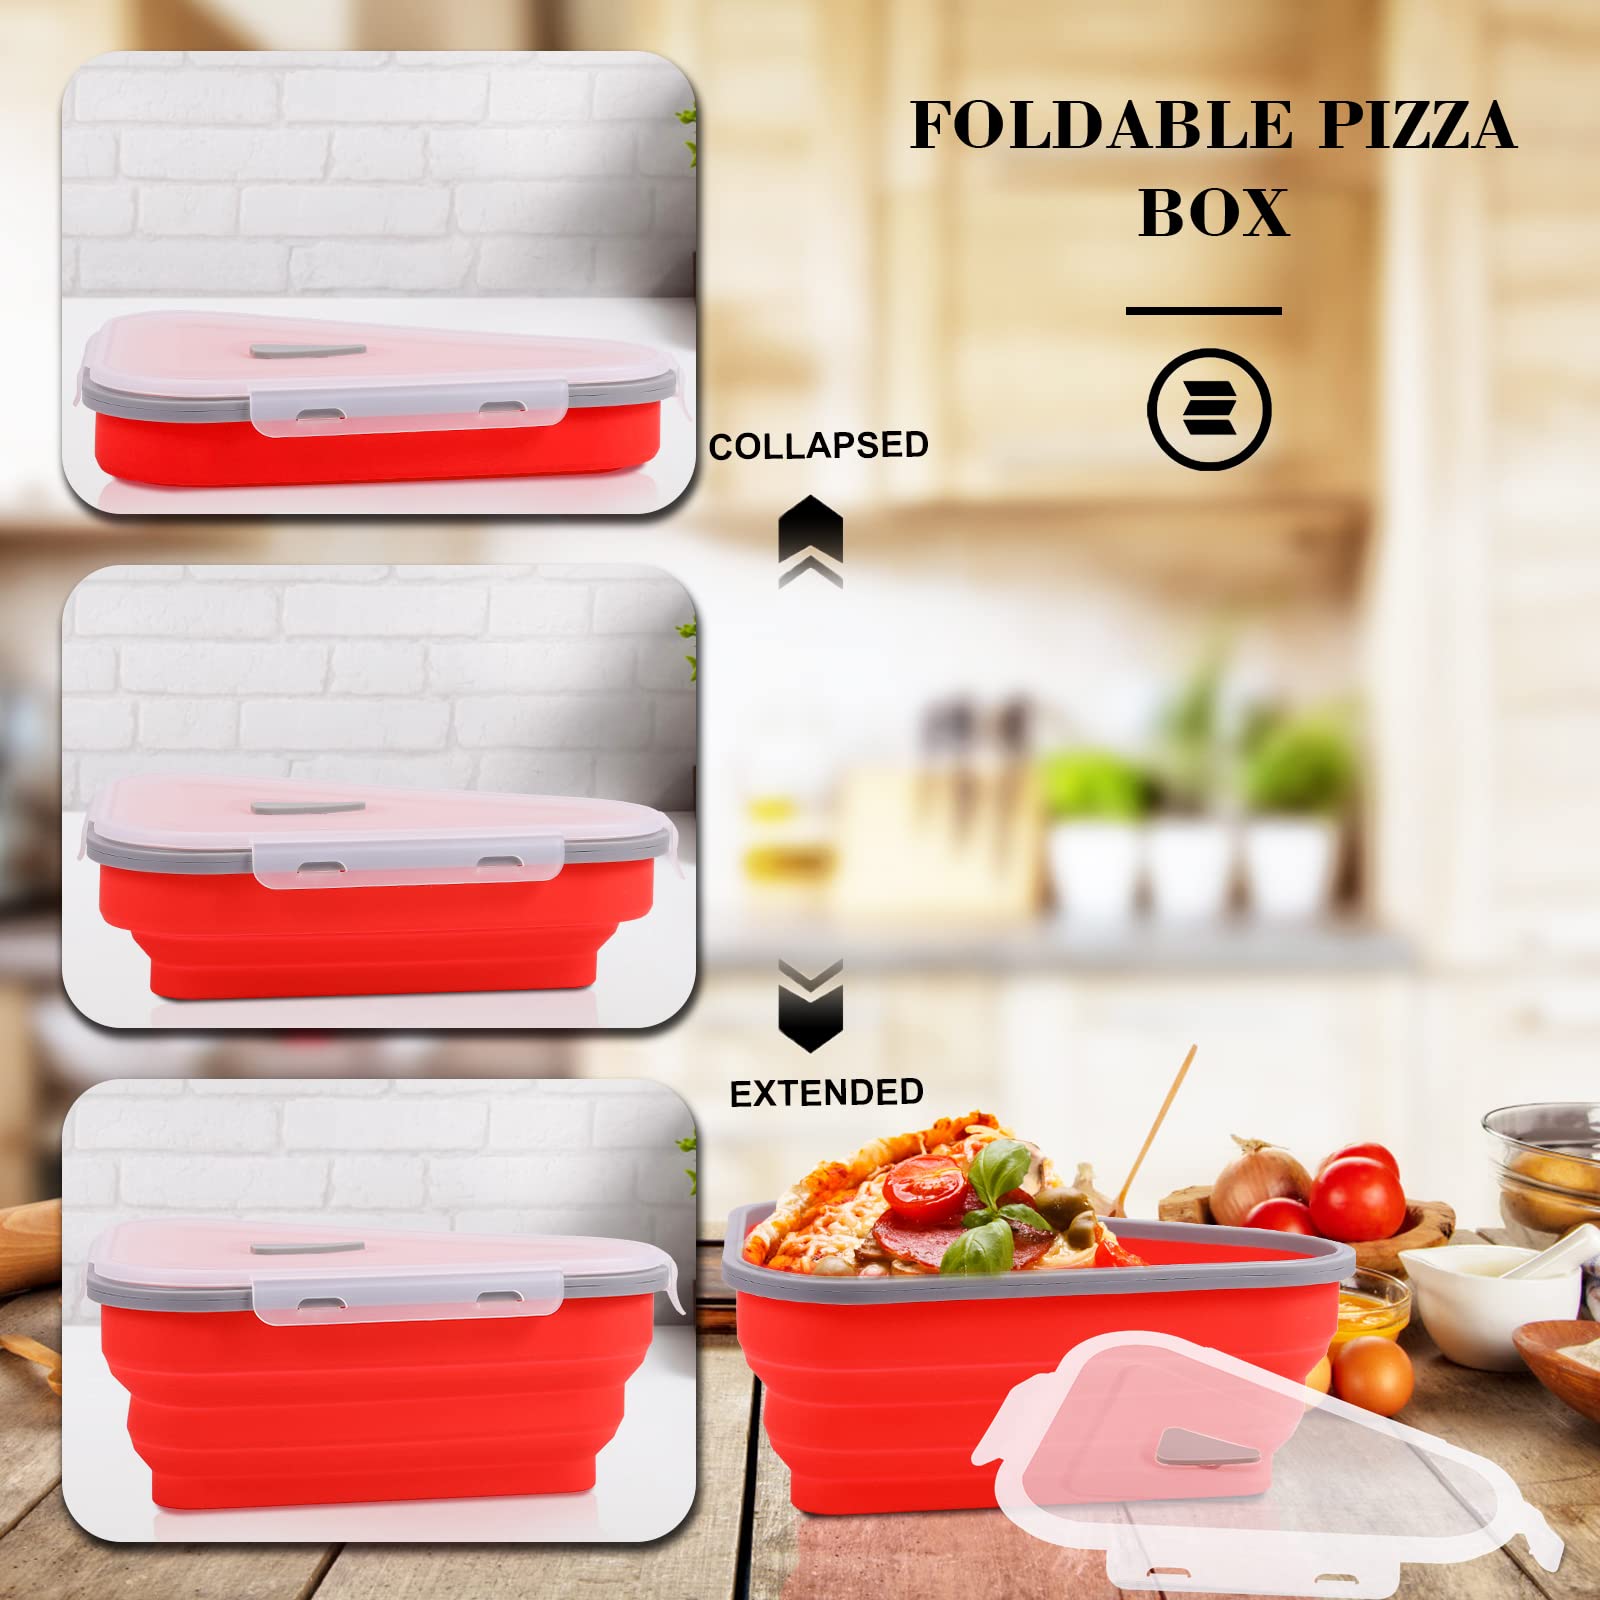 ICNESS Pizza Storage Container Expandable,Pizza Container with 5 Microwavable Serving Trays,Adjustable Pizza Slice Container,Reusable Pizza Storage to Organize Save Space,Microwave Safe